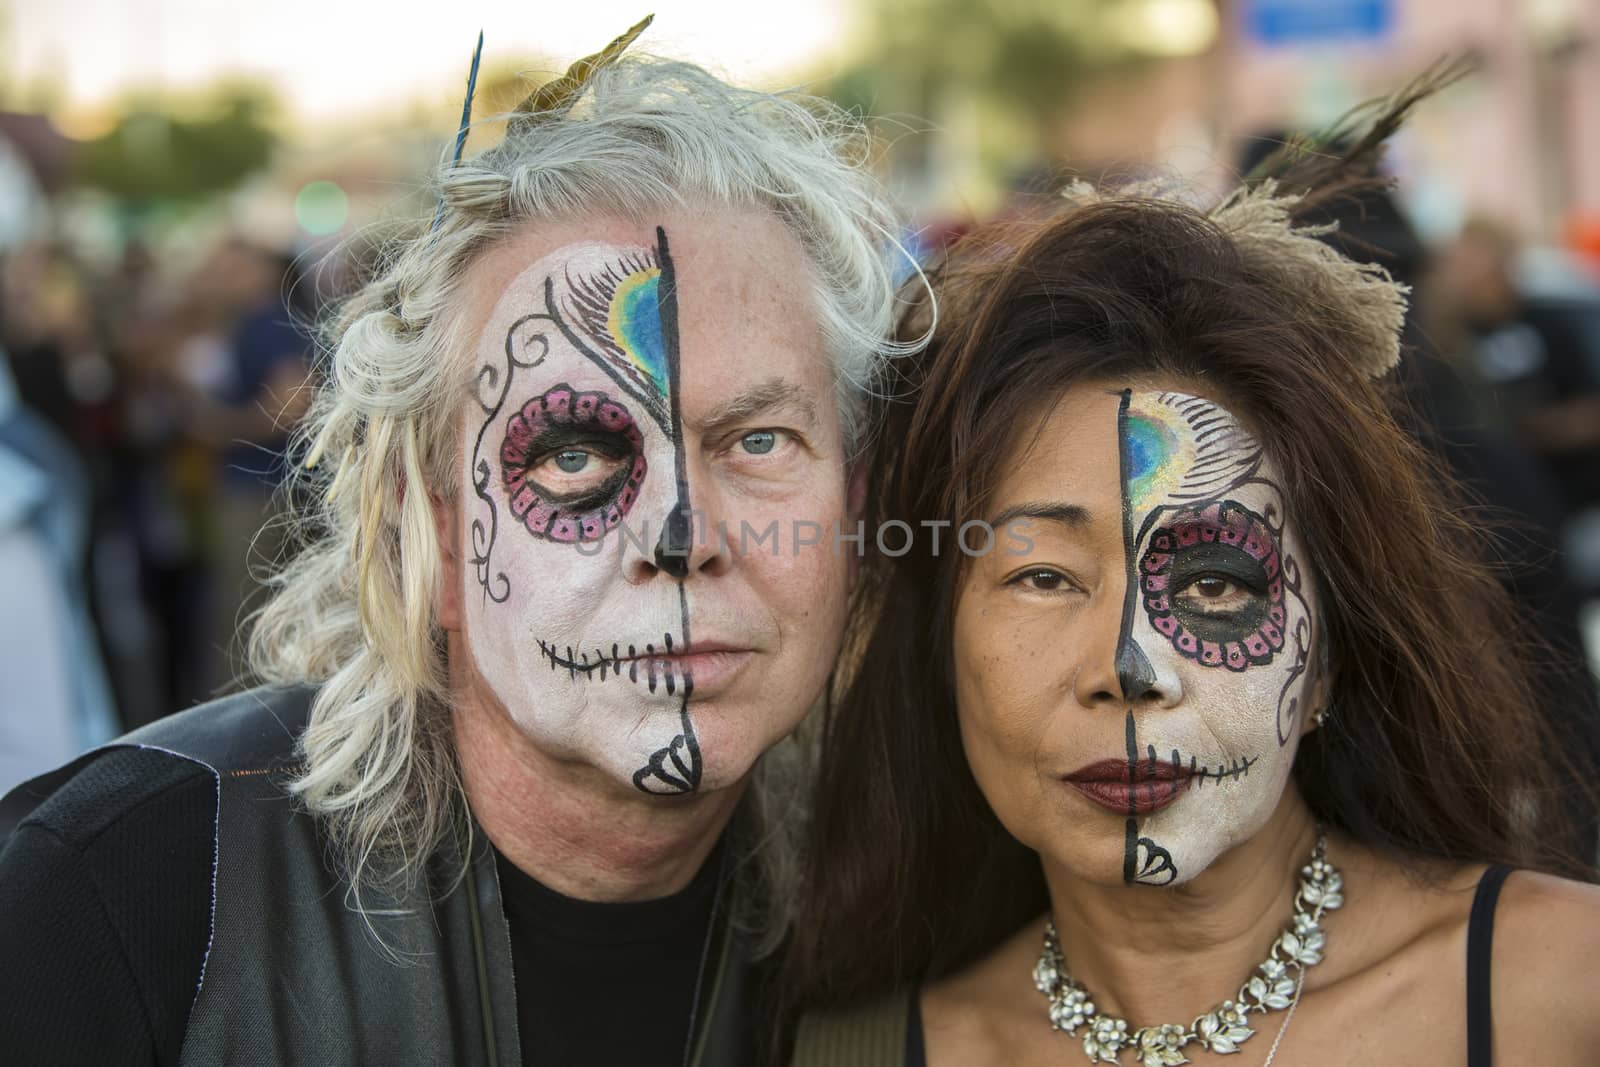 TUCSON, AZ/USA - NOVEMBER 09: Two undientified people in facepaint at the All Souls Procession on November 09, 2014 in Tucson, AZ, USA.